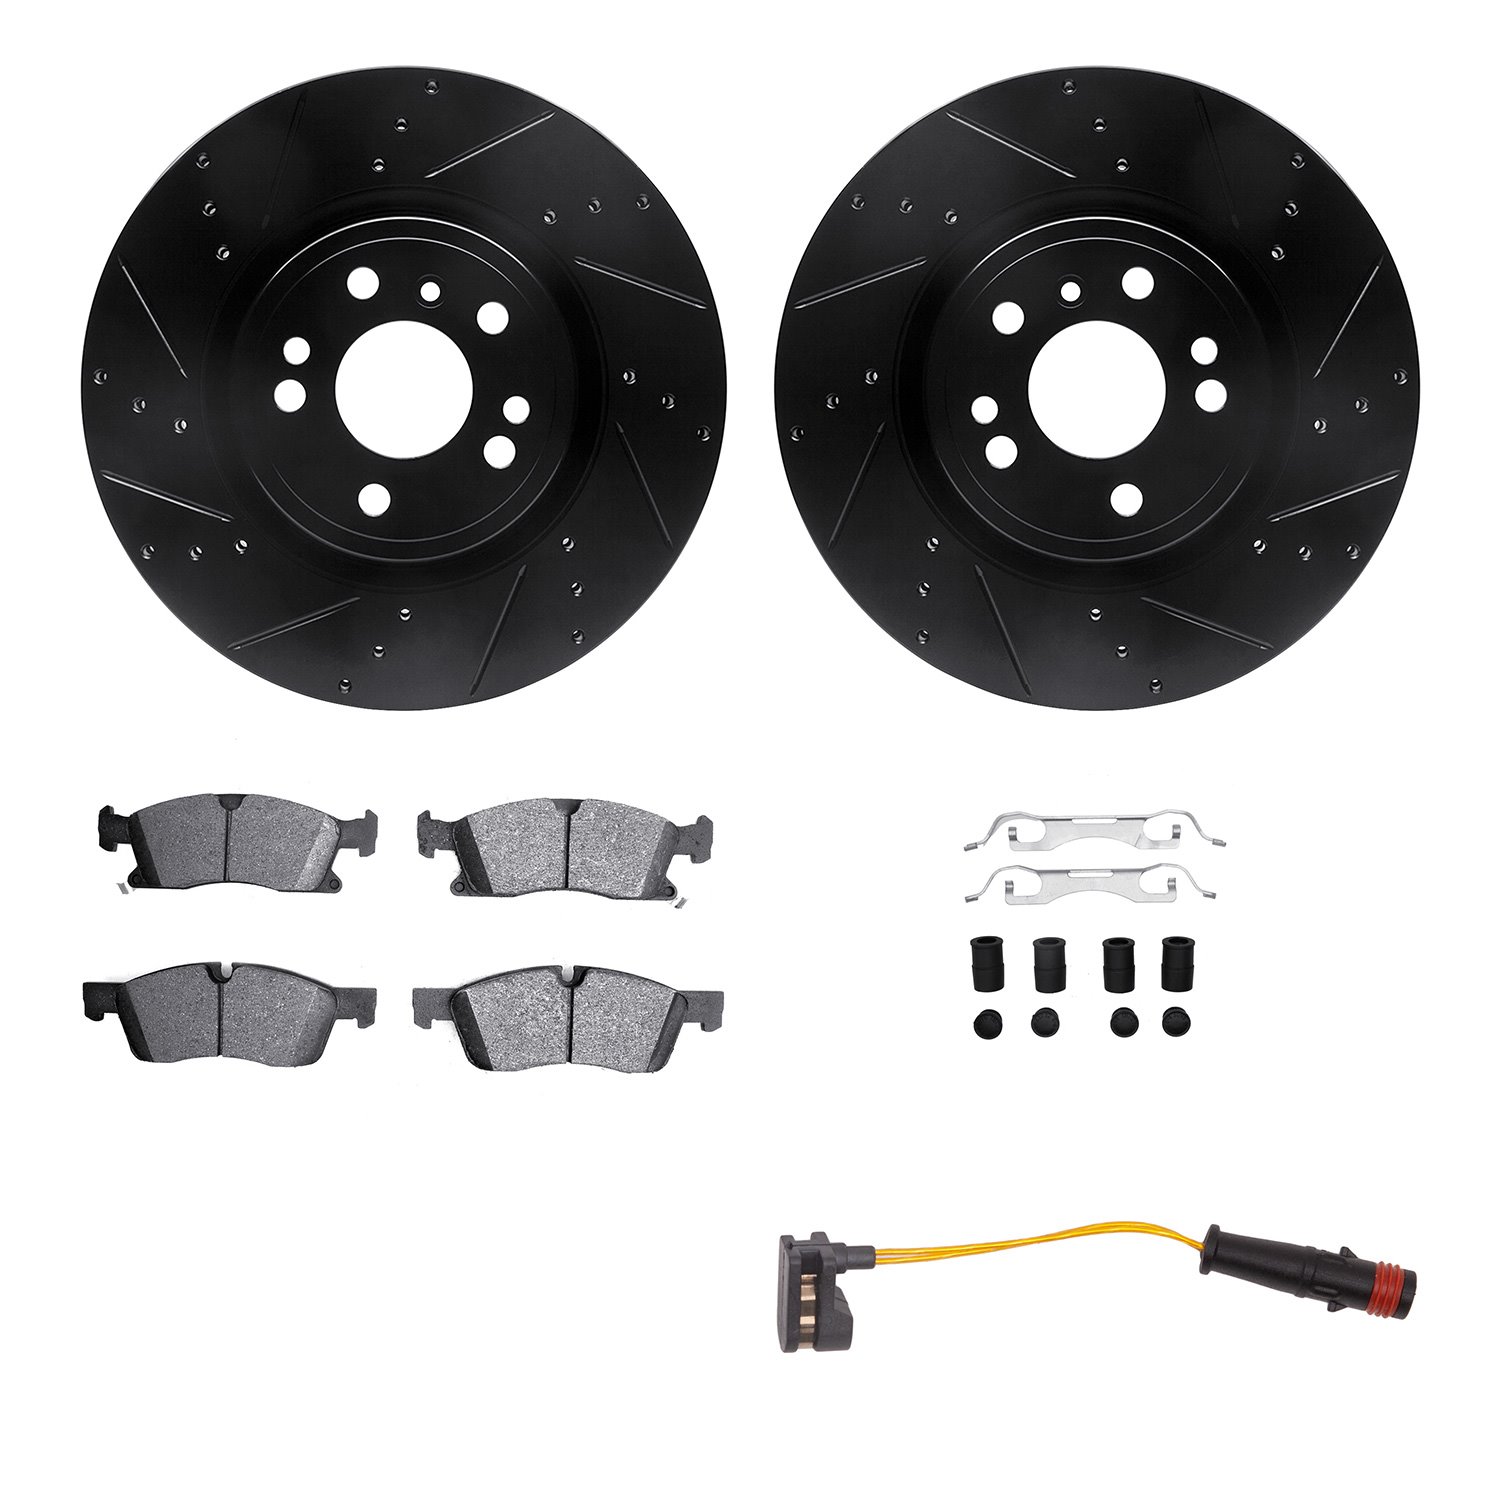 Drilled/Slotted Brake Rotors with Ultimate-Duty Brake Pads/Sensor